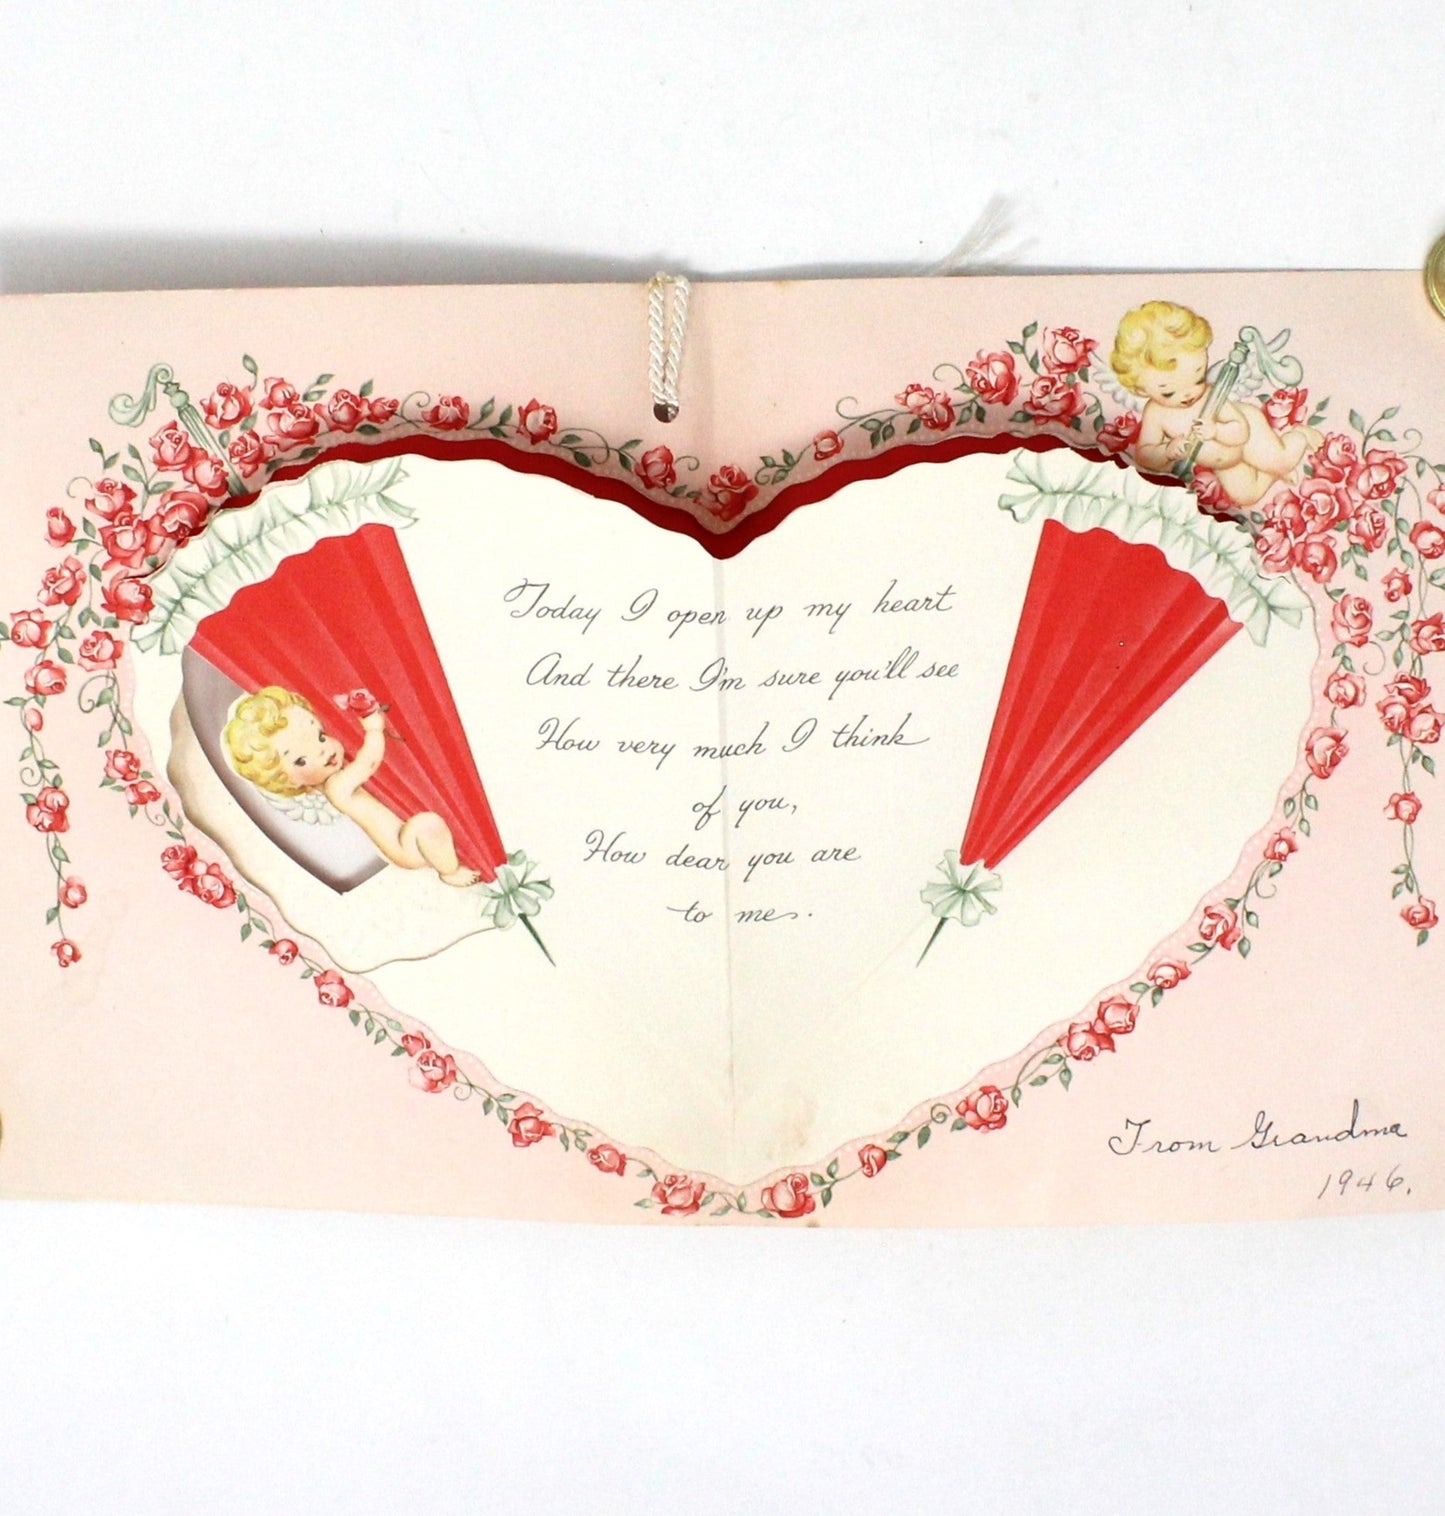 Greeting Card / Valentine Card, GB Golden Bell, Pop Up Cupid in Heart, Vintage